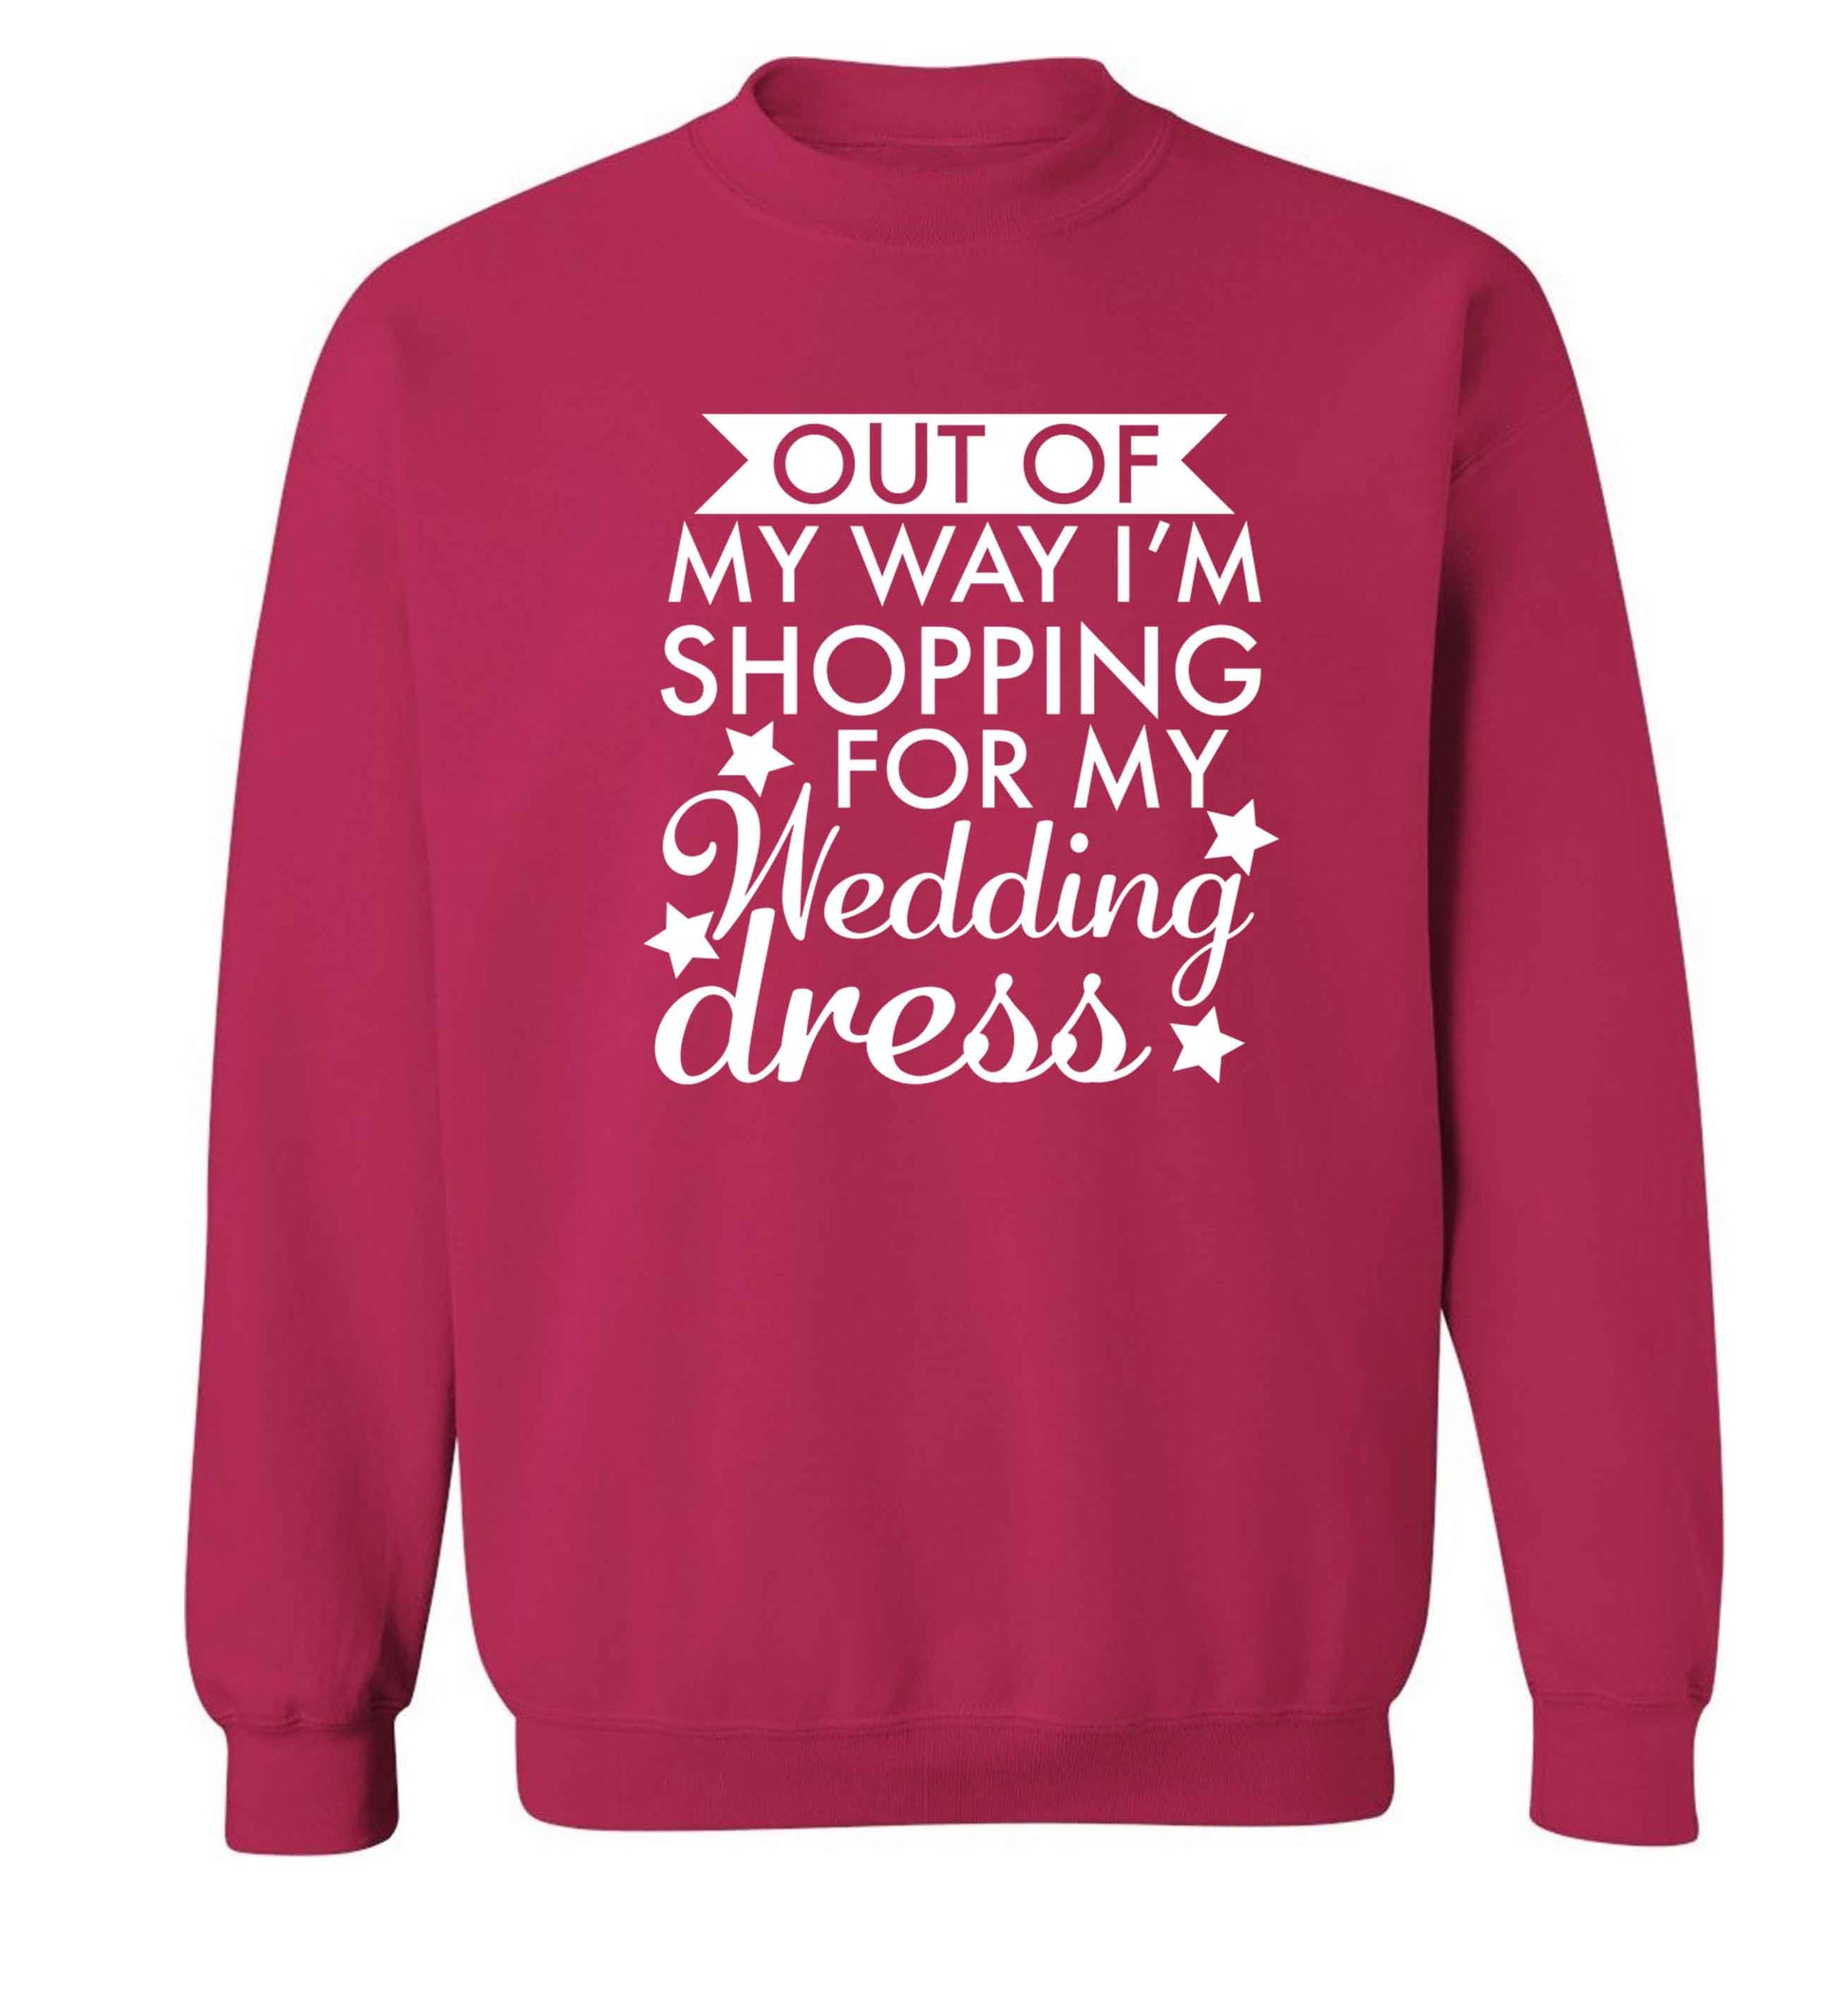 Out of my way I'm shopping for my wedding dress adult's unisex pink sweater 2XL